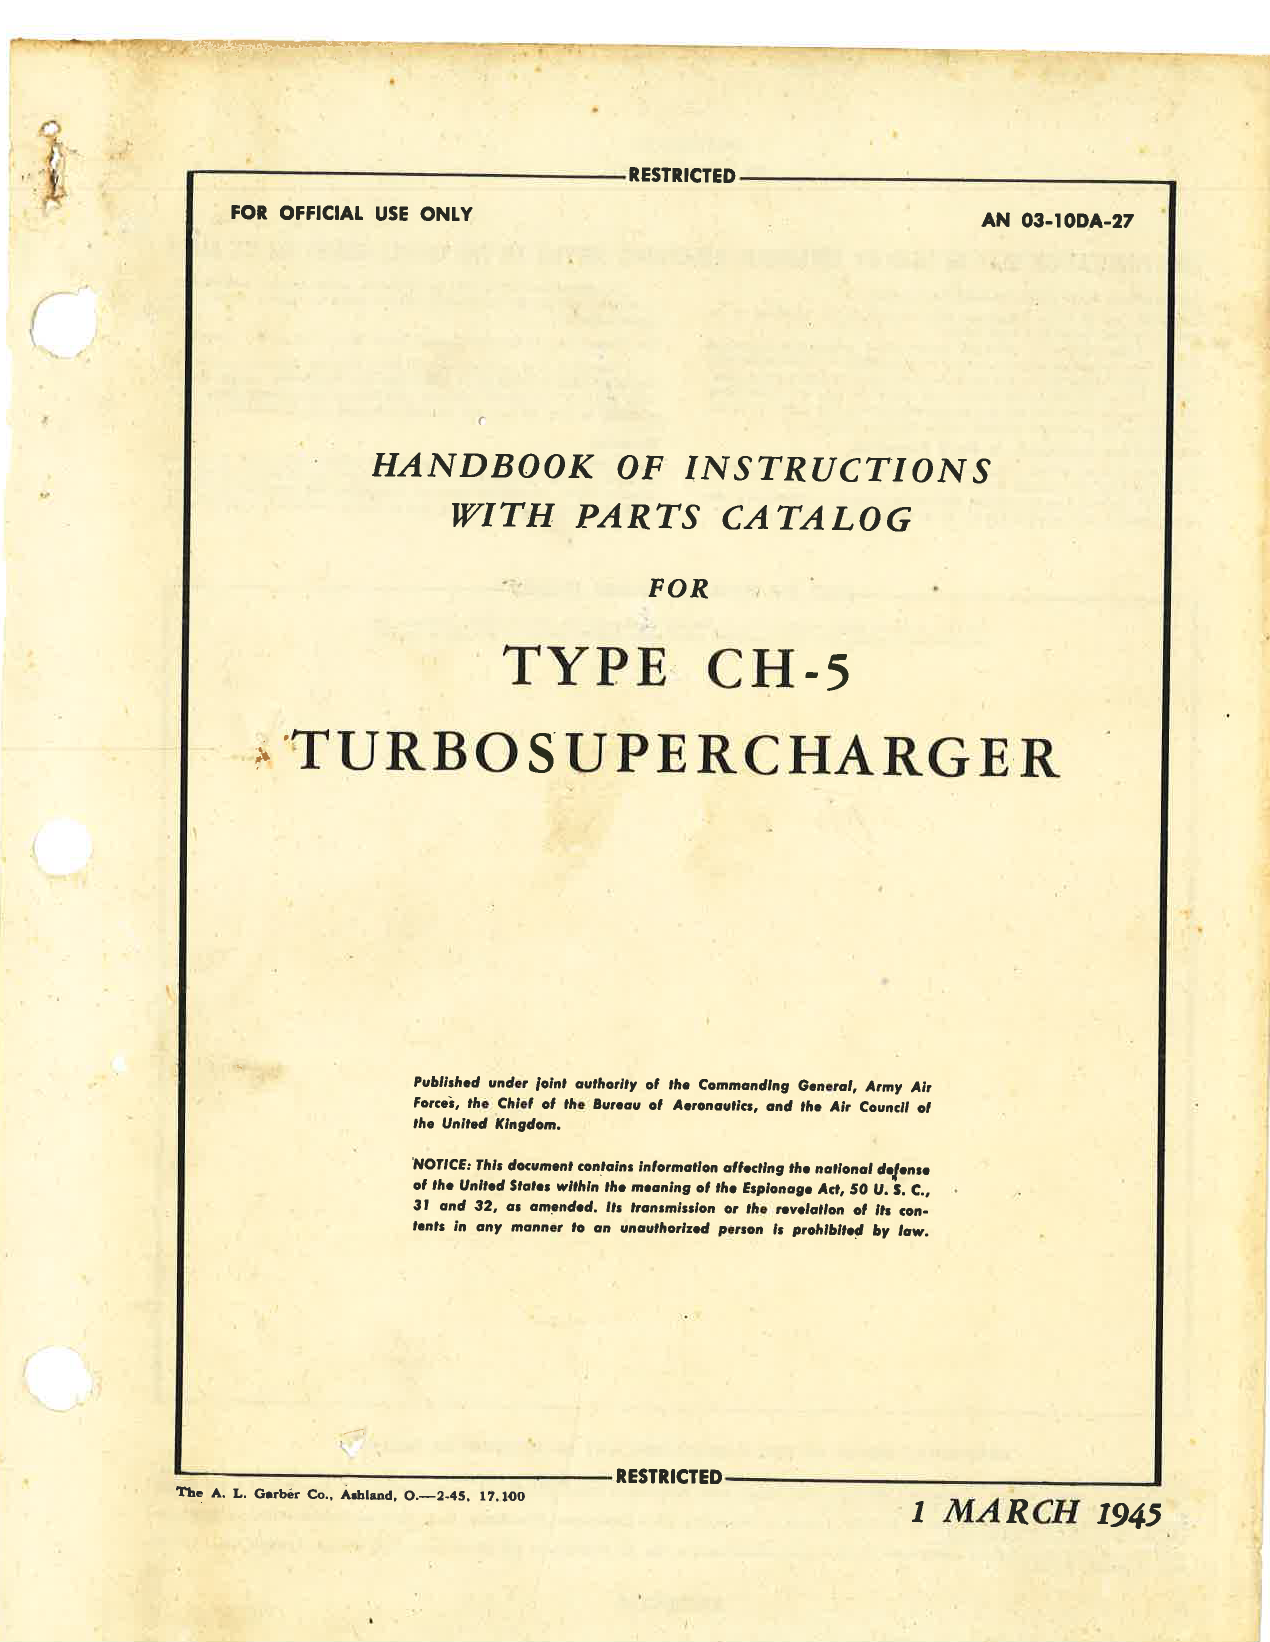 Sample page 1 from AirCorps Library document: Handbook of Instructions with Parts Catalog for Type CH-5 Turbosupercharger